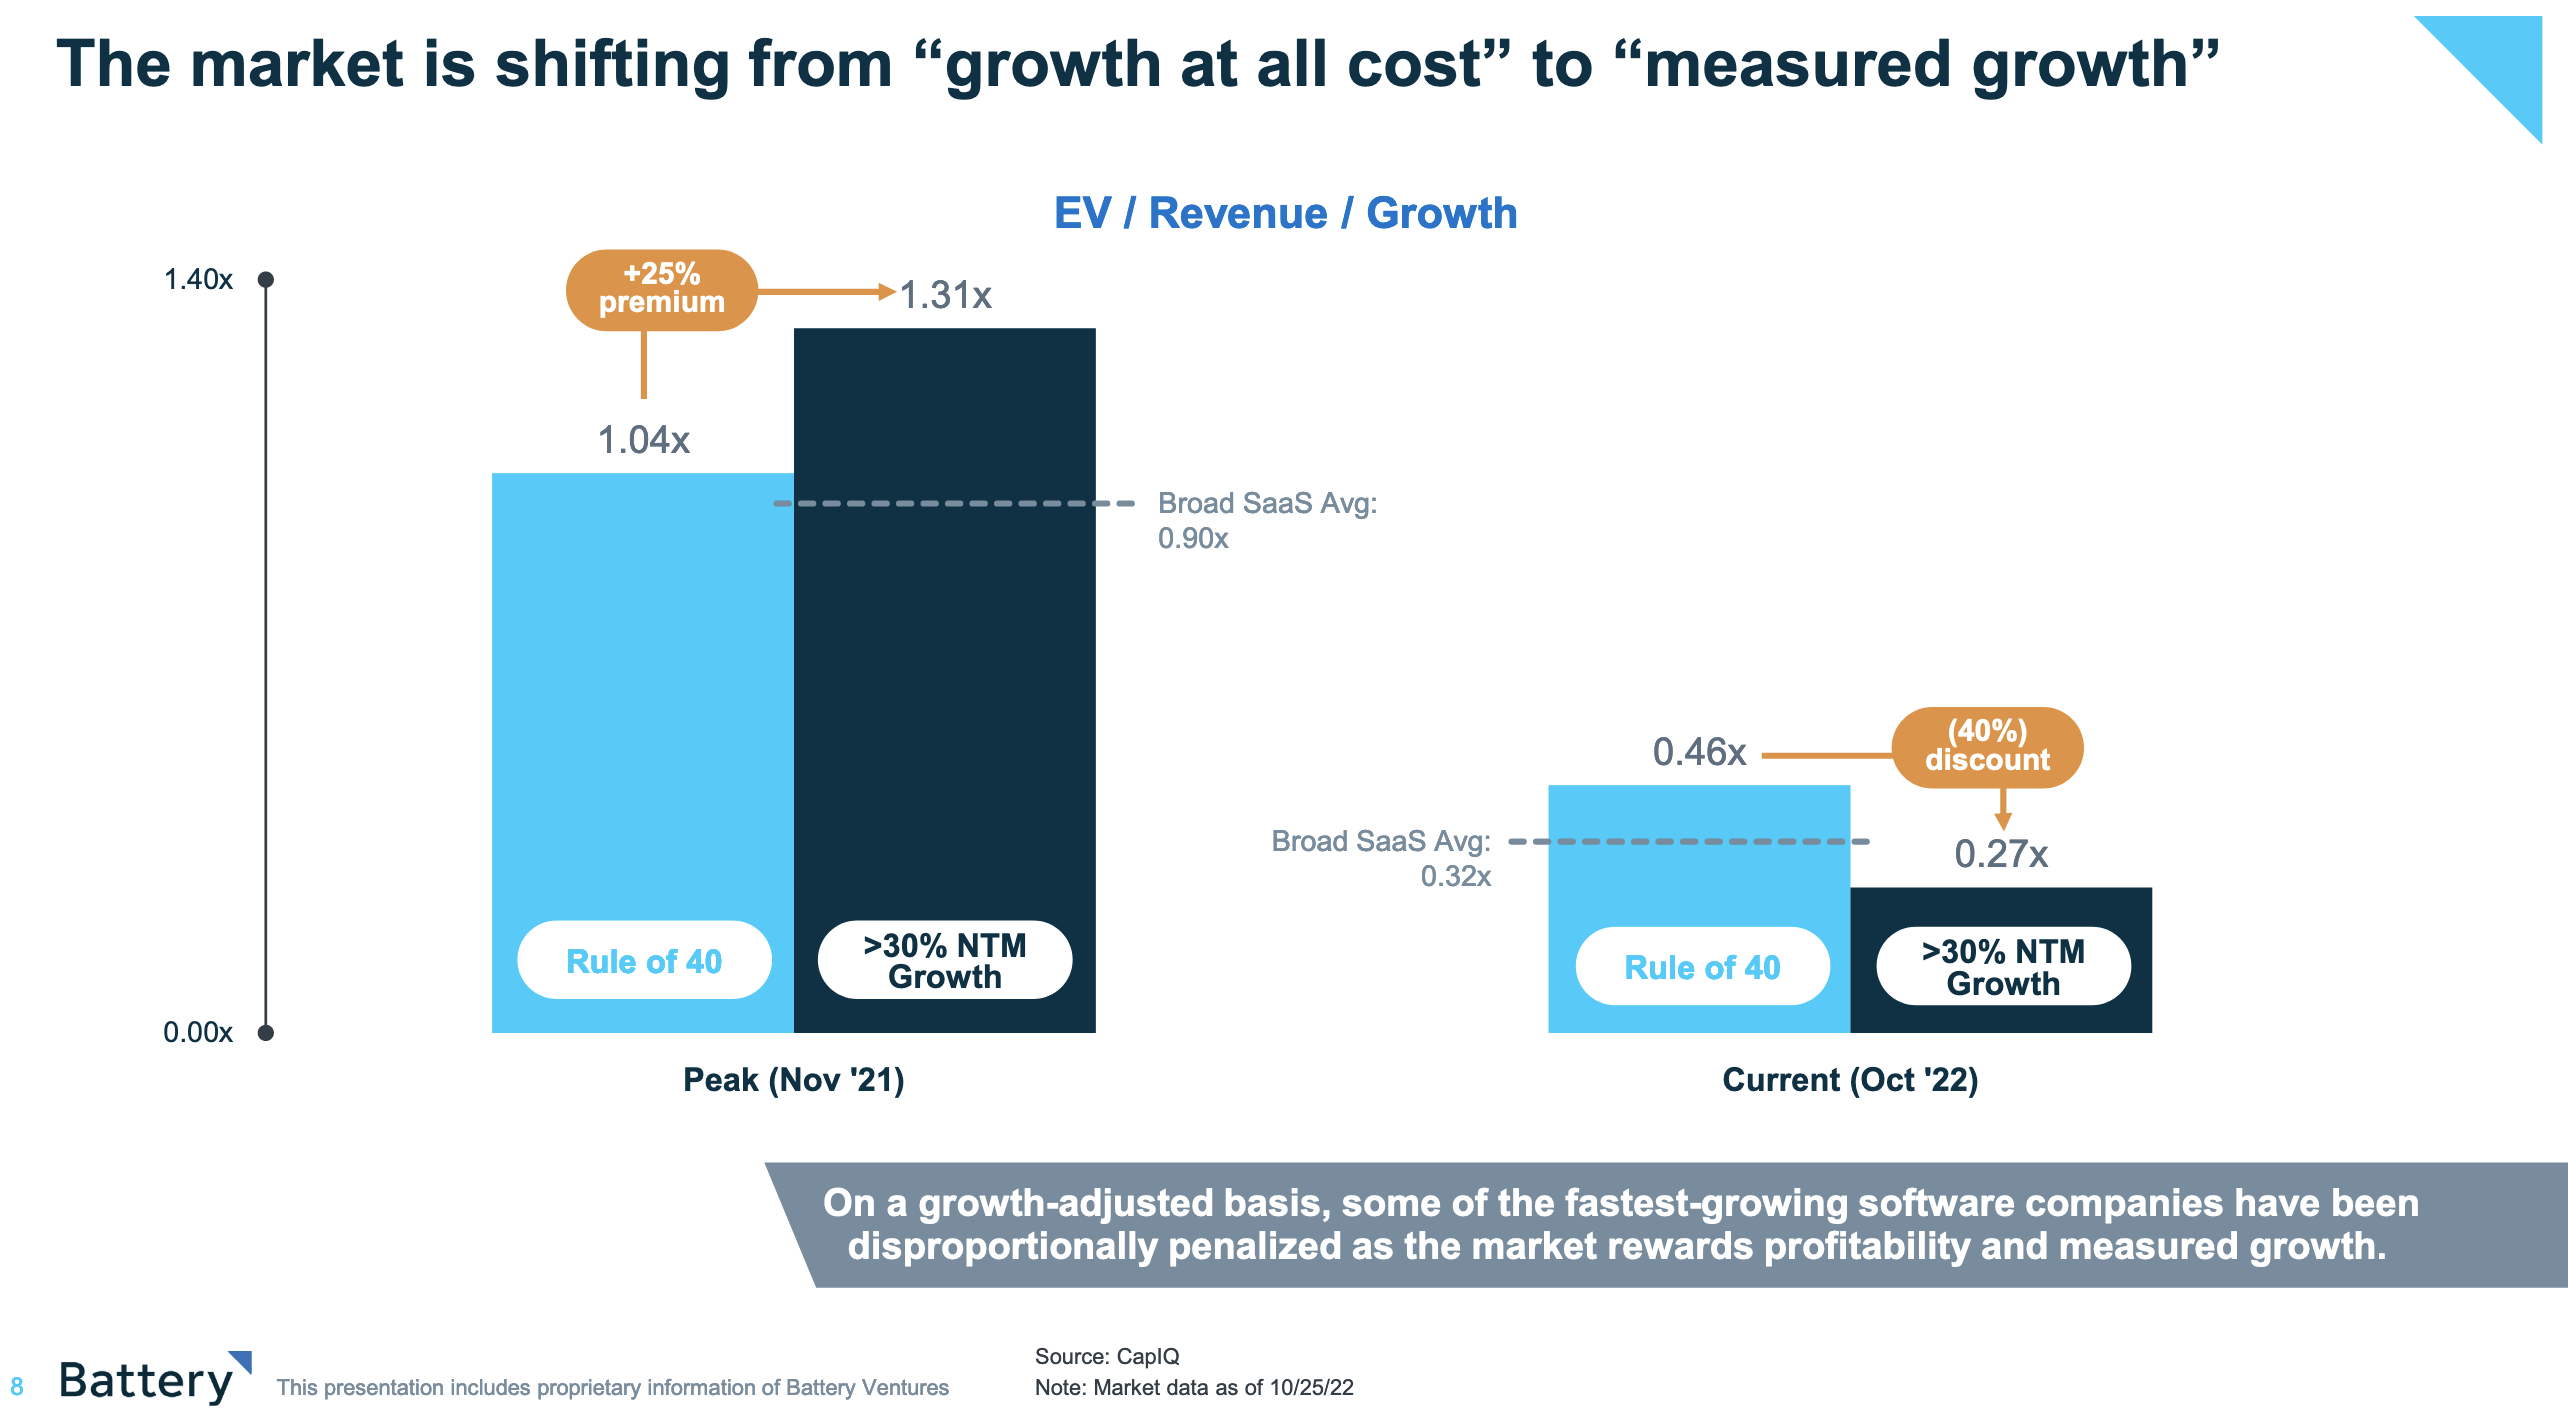 "On a growth-adjusted basis, some of the fastest-growing software companies have been disproportionally penalized as the market rewards profitability and measured growth."